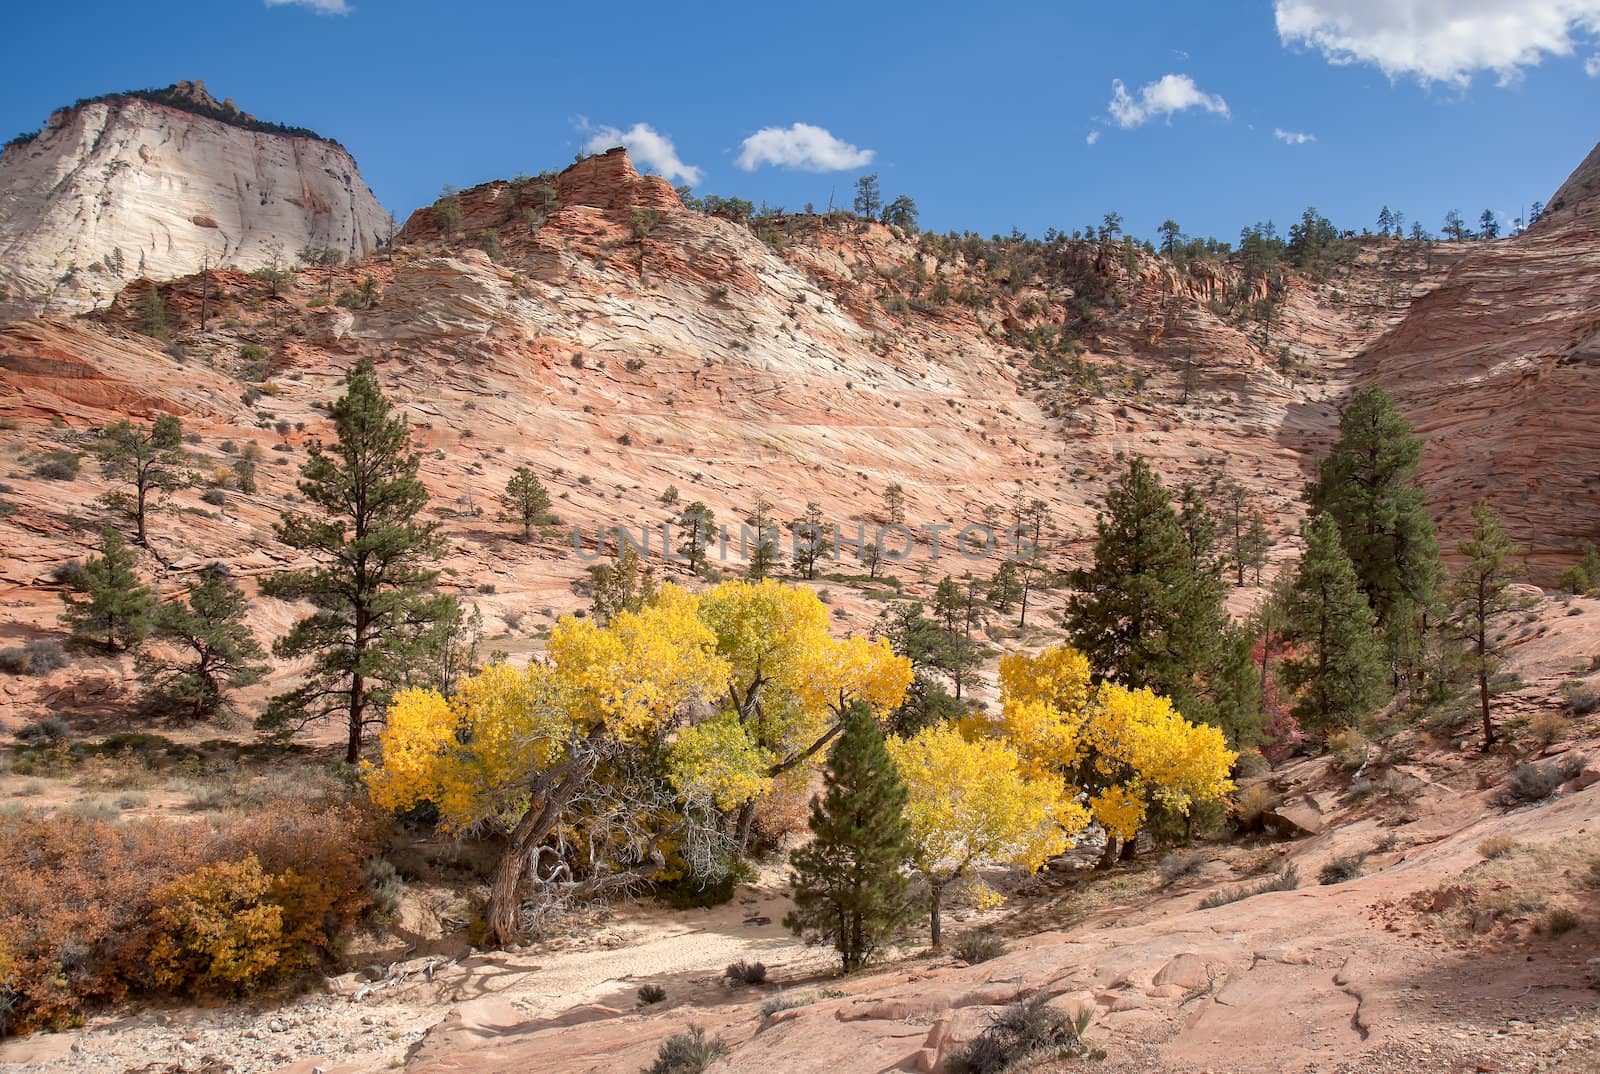 This image shows a group of trees with leaves turning to a bright yellow surrounded by colorful sandstone walls at Zion National Park.